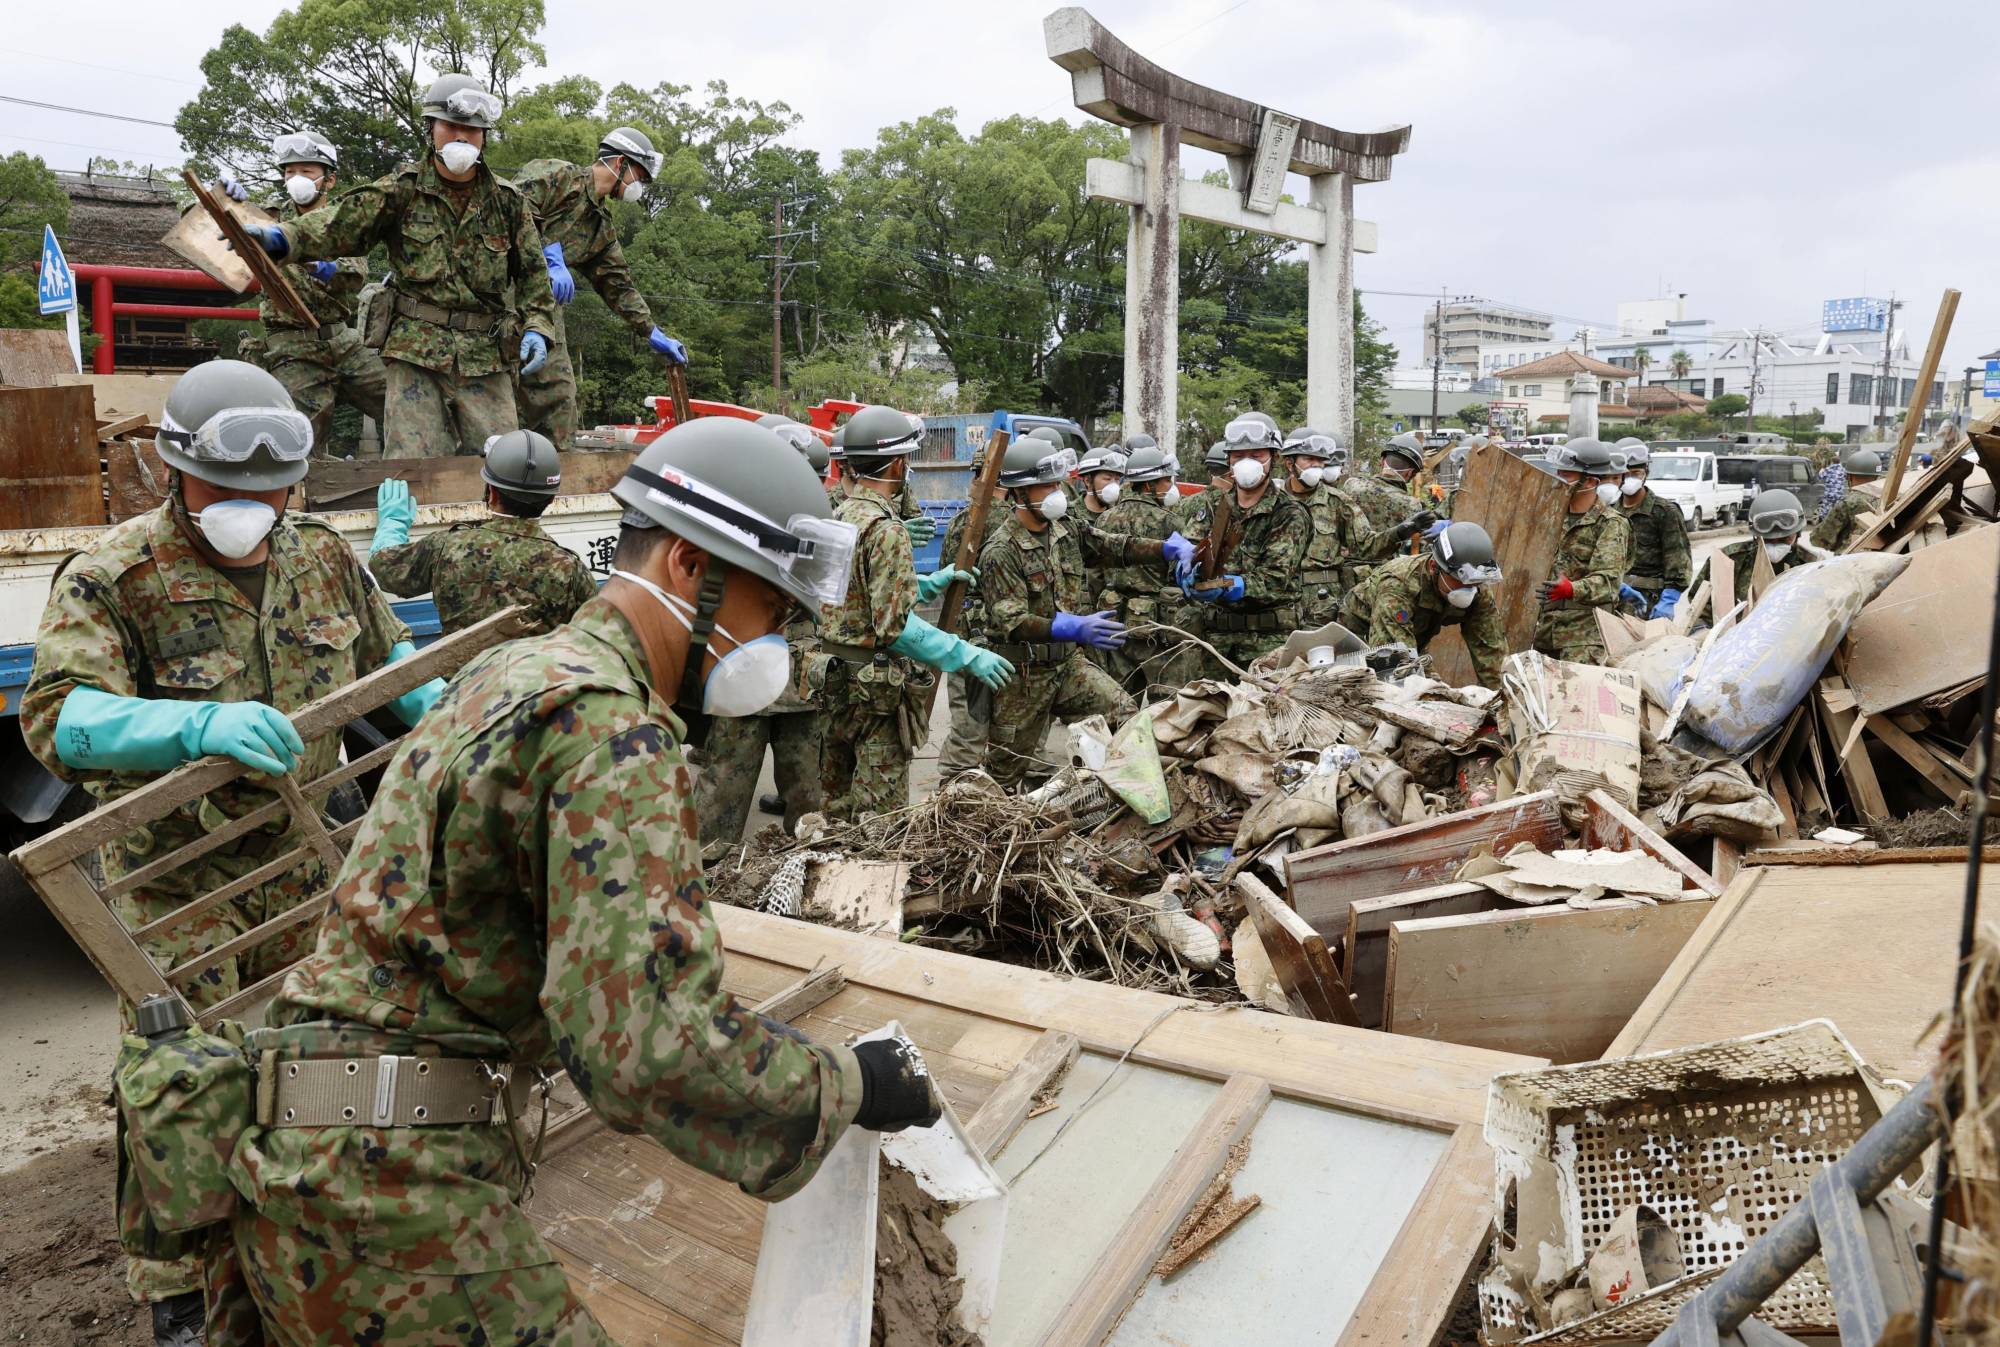 While it is often thought that the Self-Defense Forces or other first responders would come to the rescue in times of disaster, this would not be easy in densely packed metropolitan areas. | KYODO